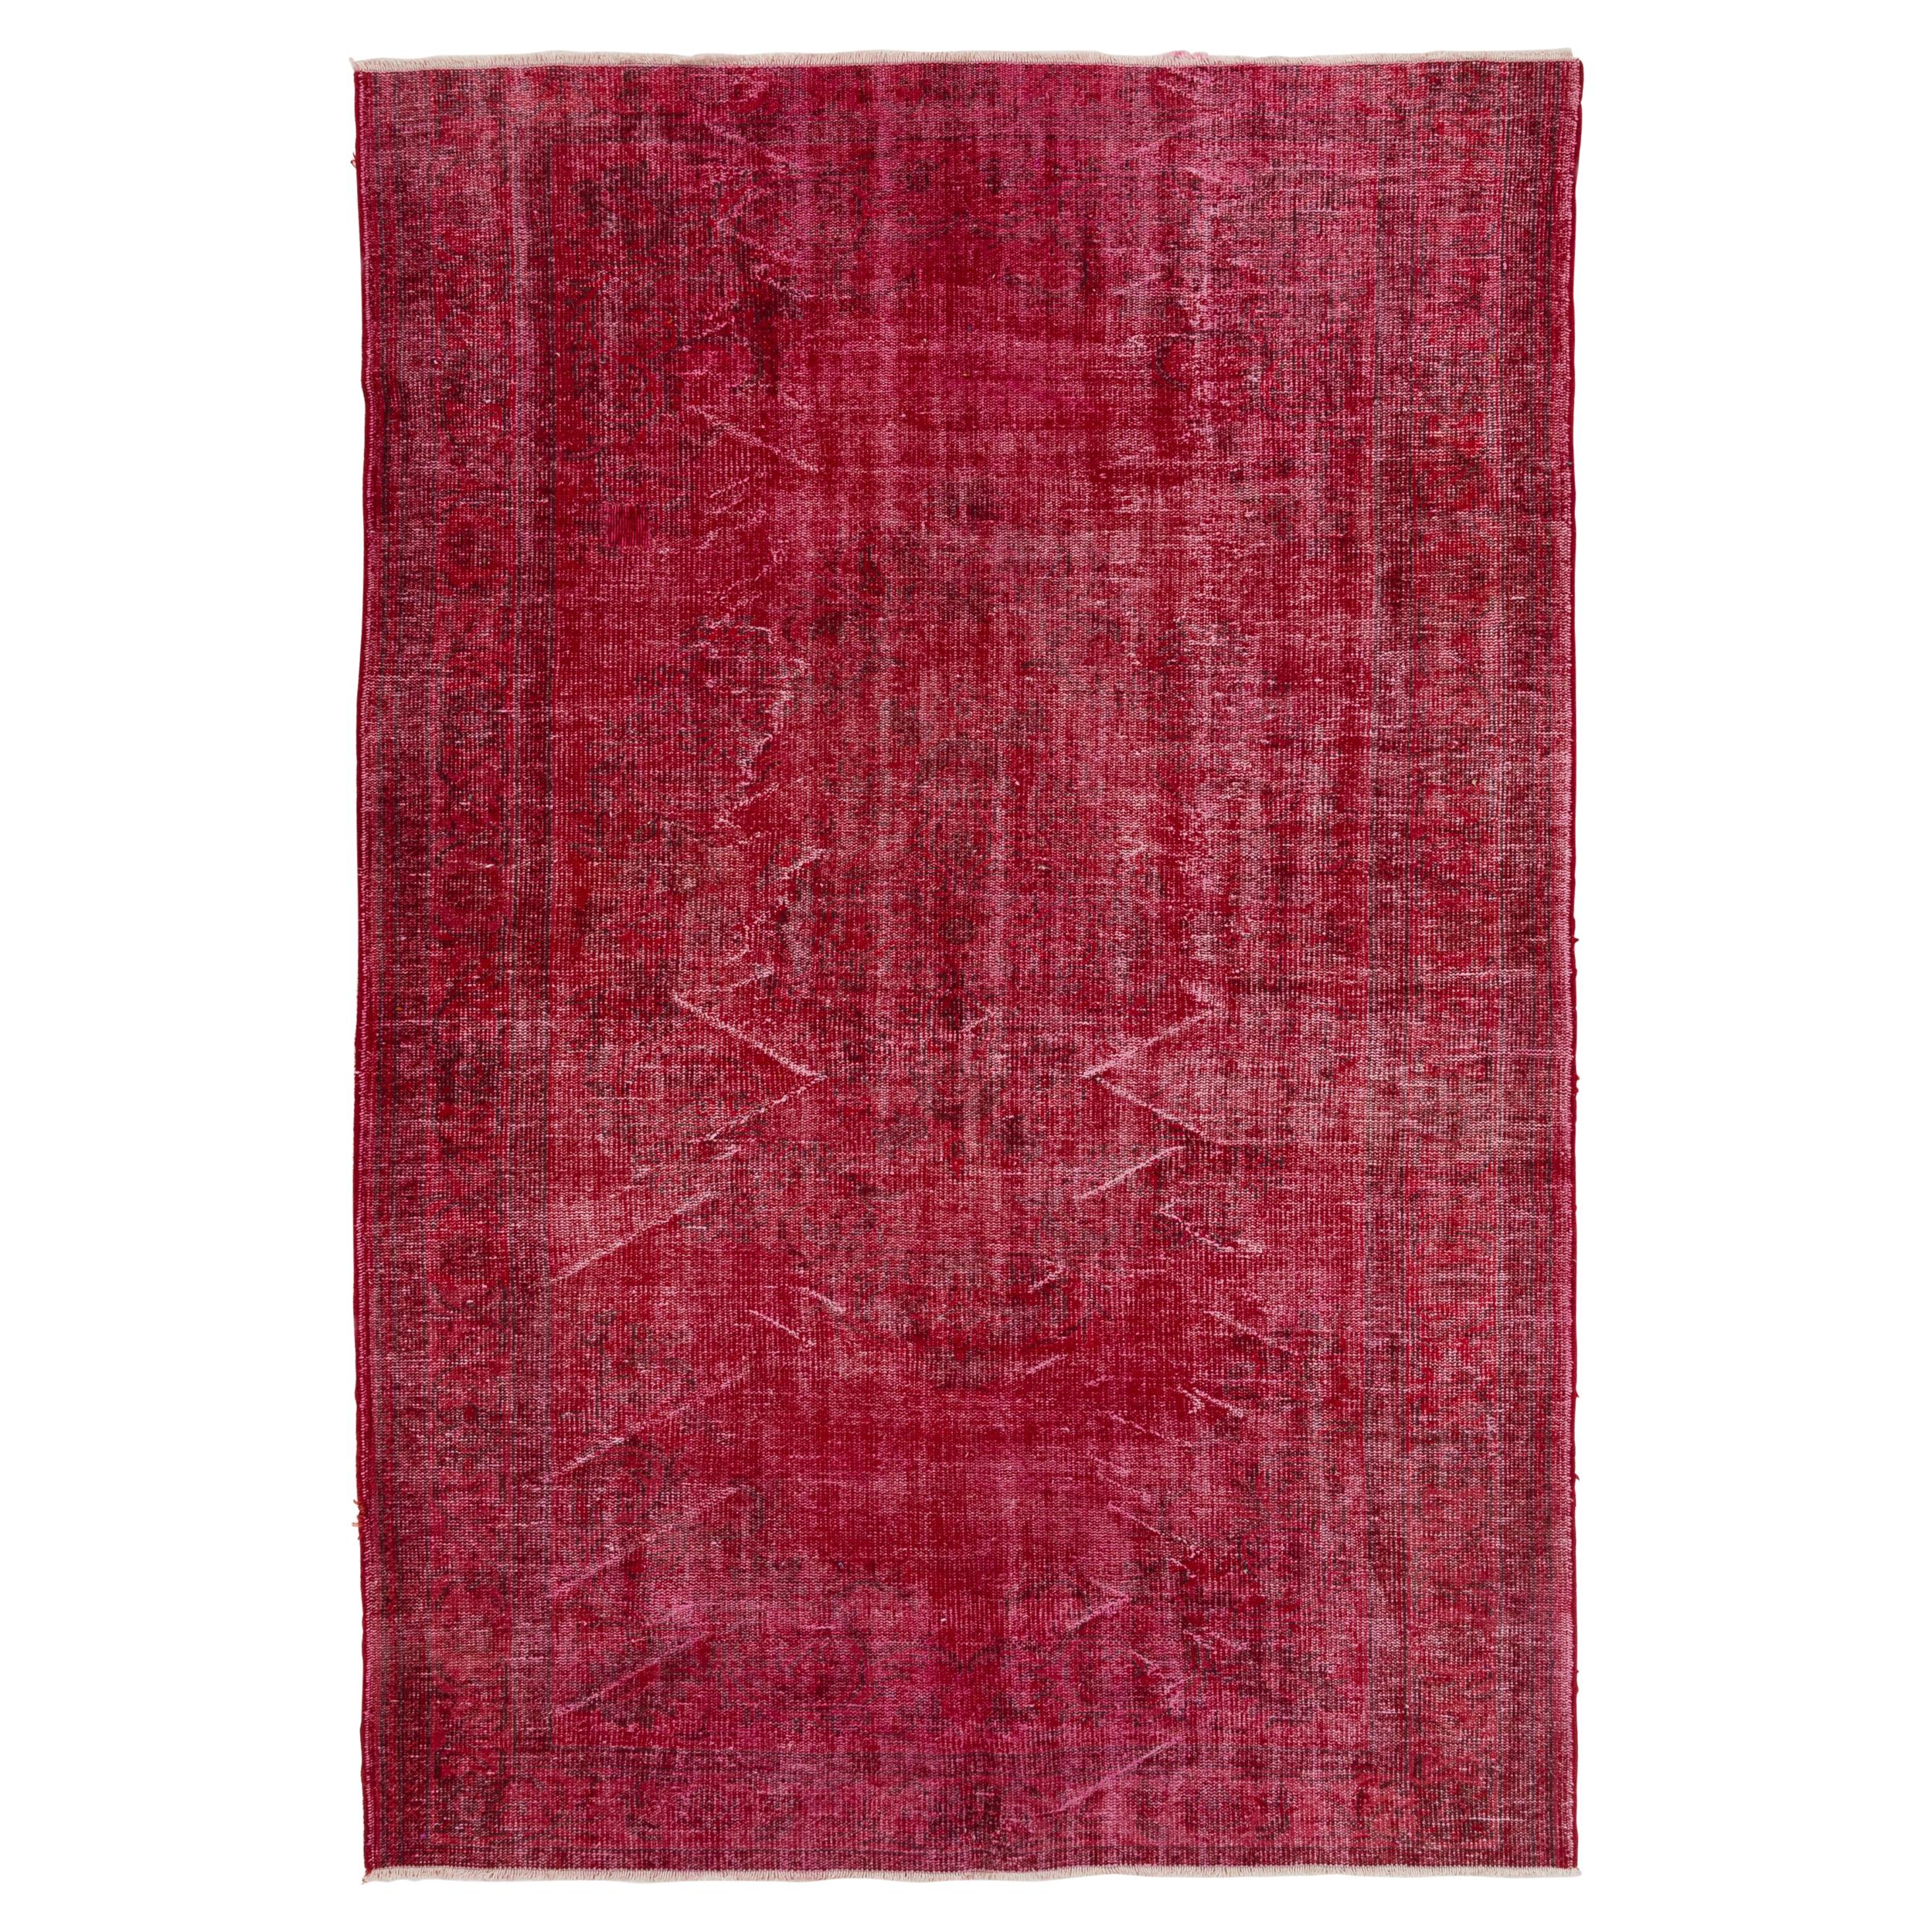 6.5x9.6 Ft Mid-Century Handmade Turkish Wool Rug in Red, Solid Modern Carpet For Sale